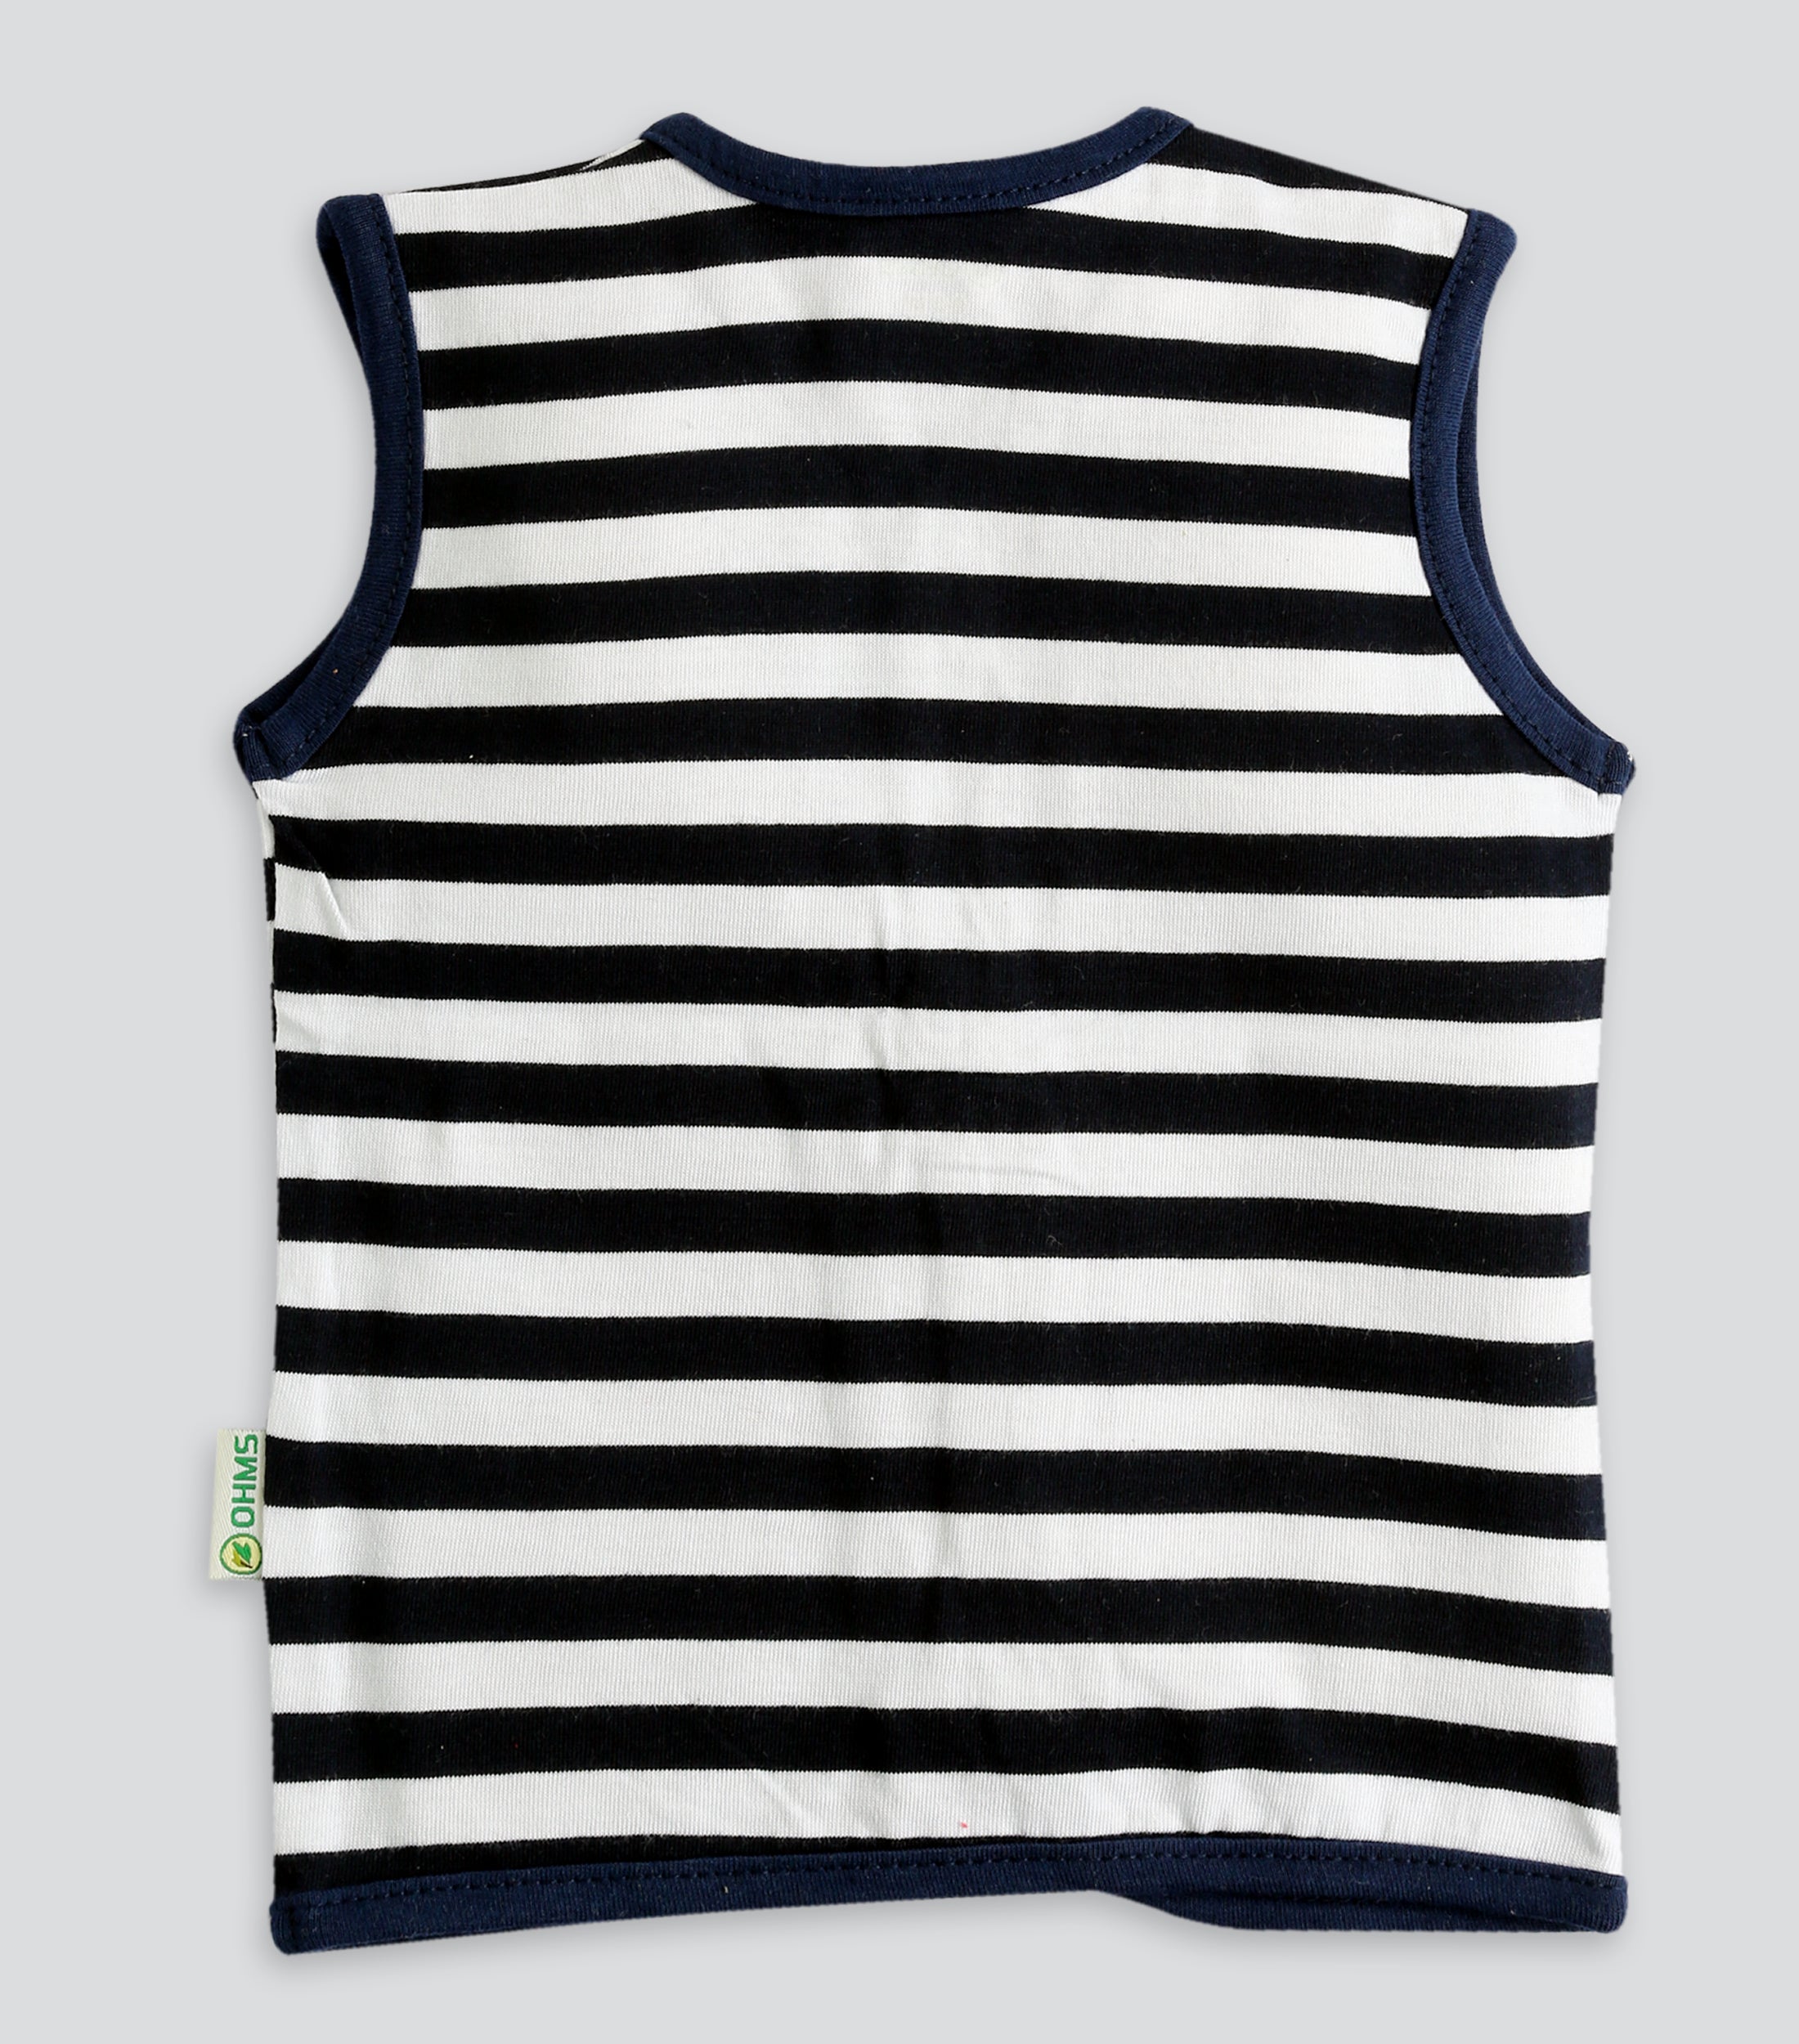 OHMS Vest For Baby Boys & Baby Girls Pure Cotton (Multicolor Pack of 5)